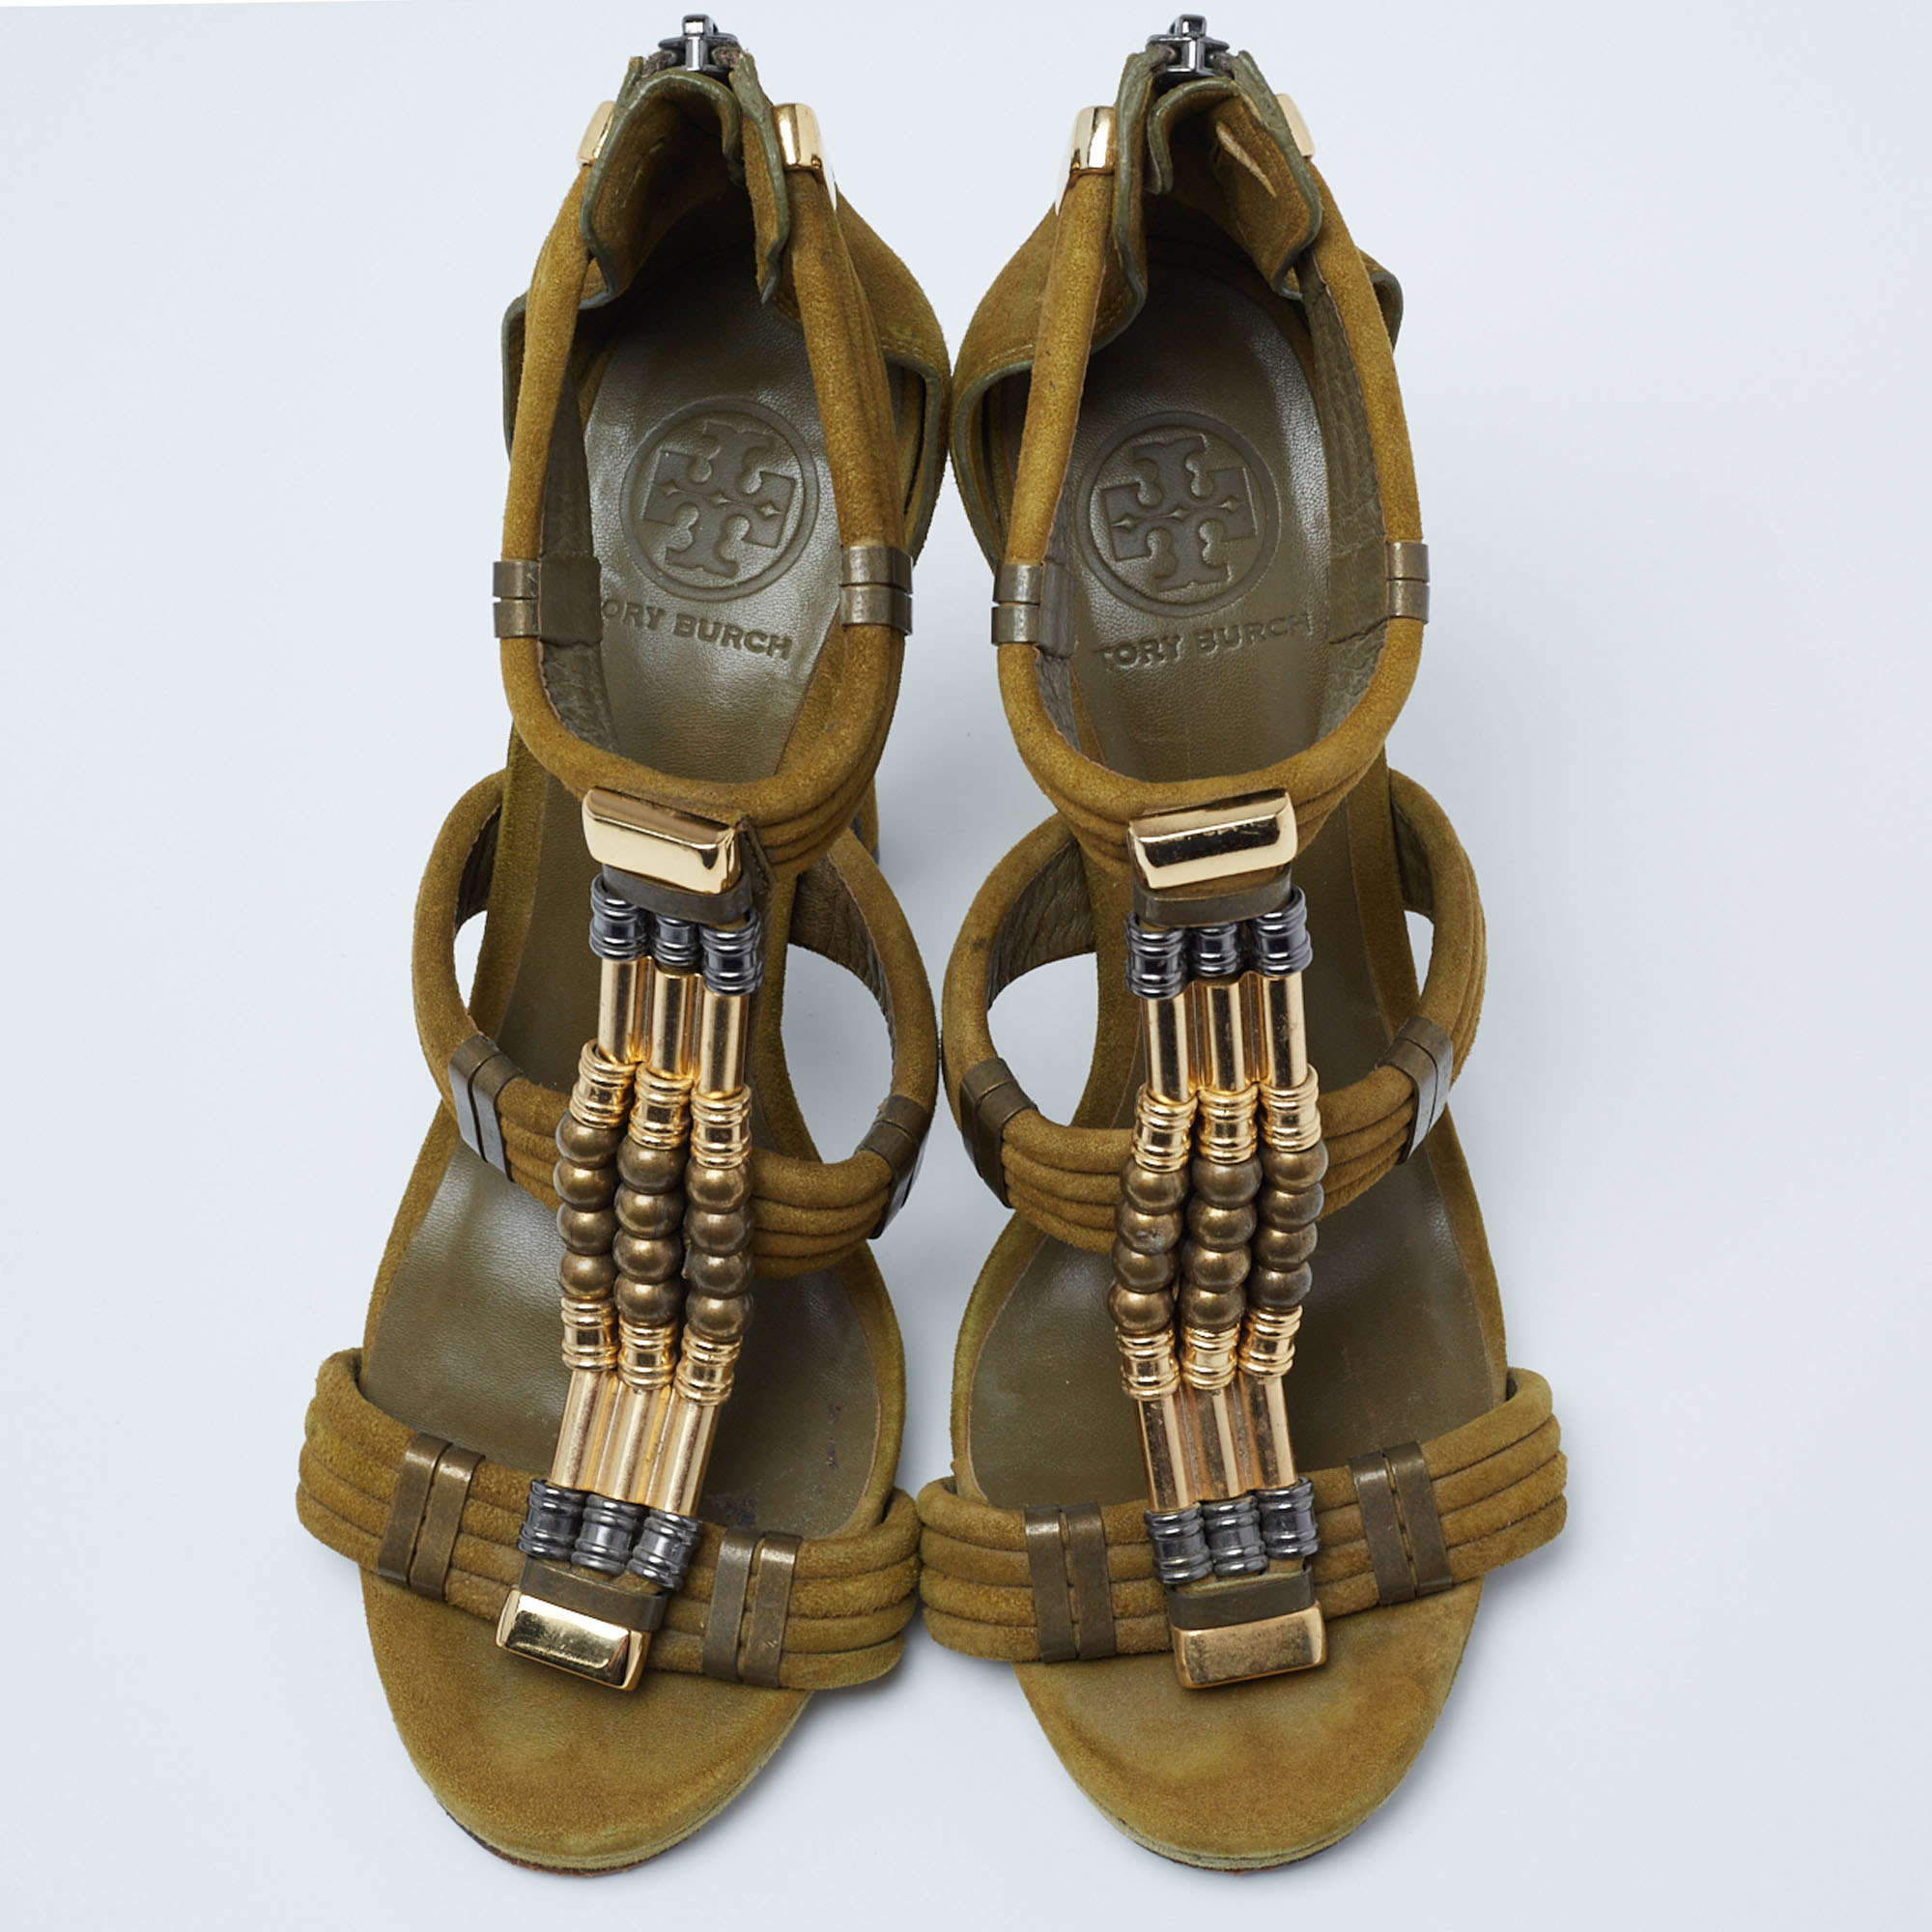 Tory Burch Olive Green Suede Beaded Gladiator Sandals Size 39